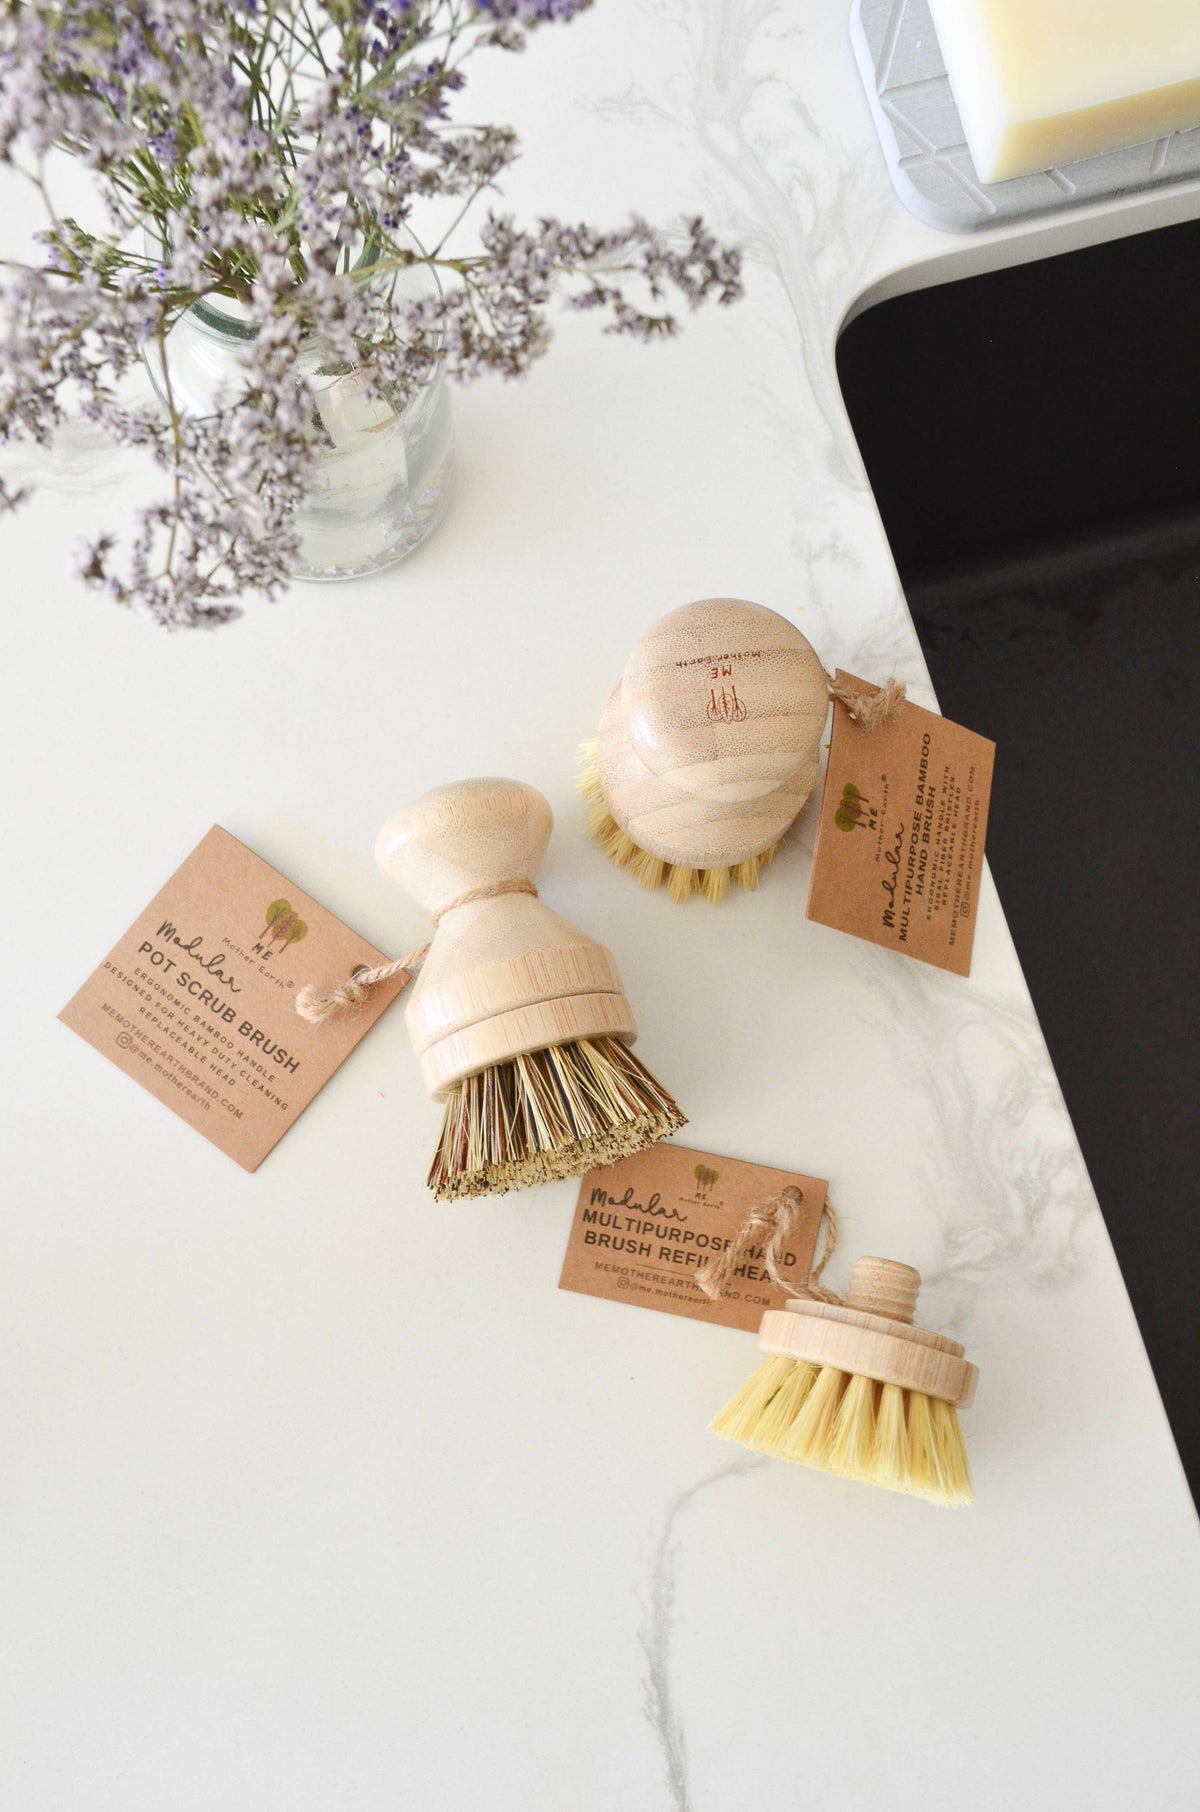 Me Mother Earth - Bamboo Modular Cleaning Brush 3pk